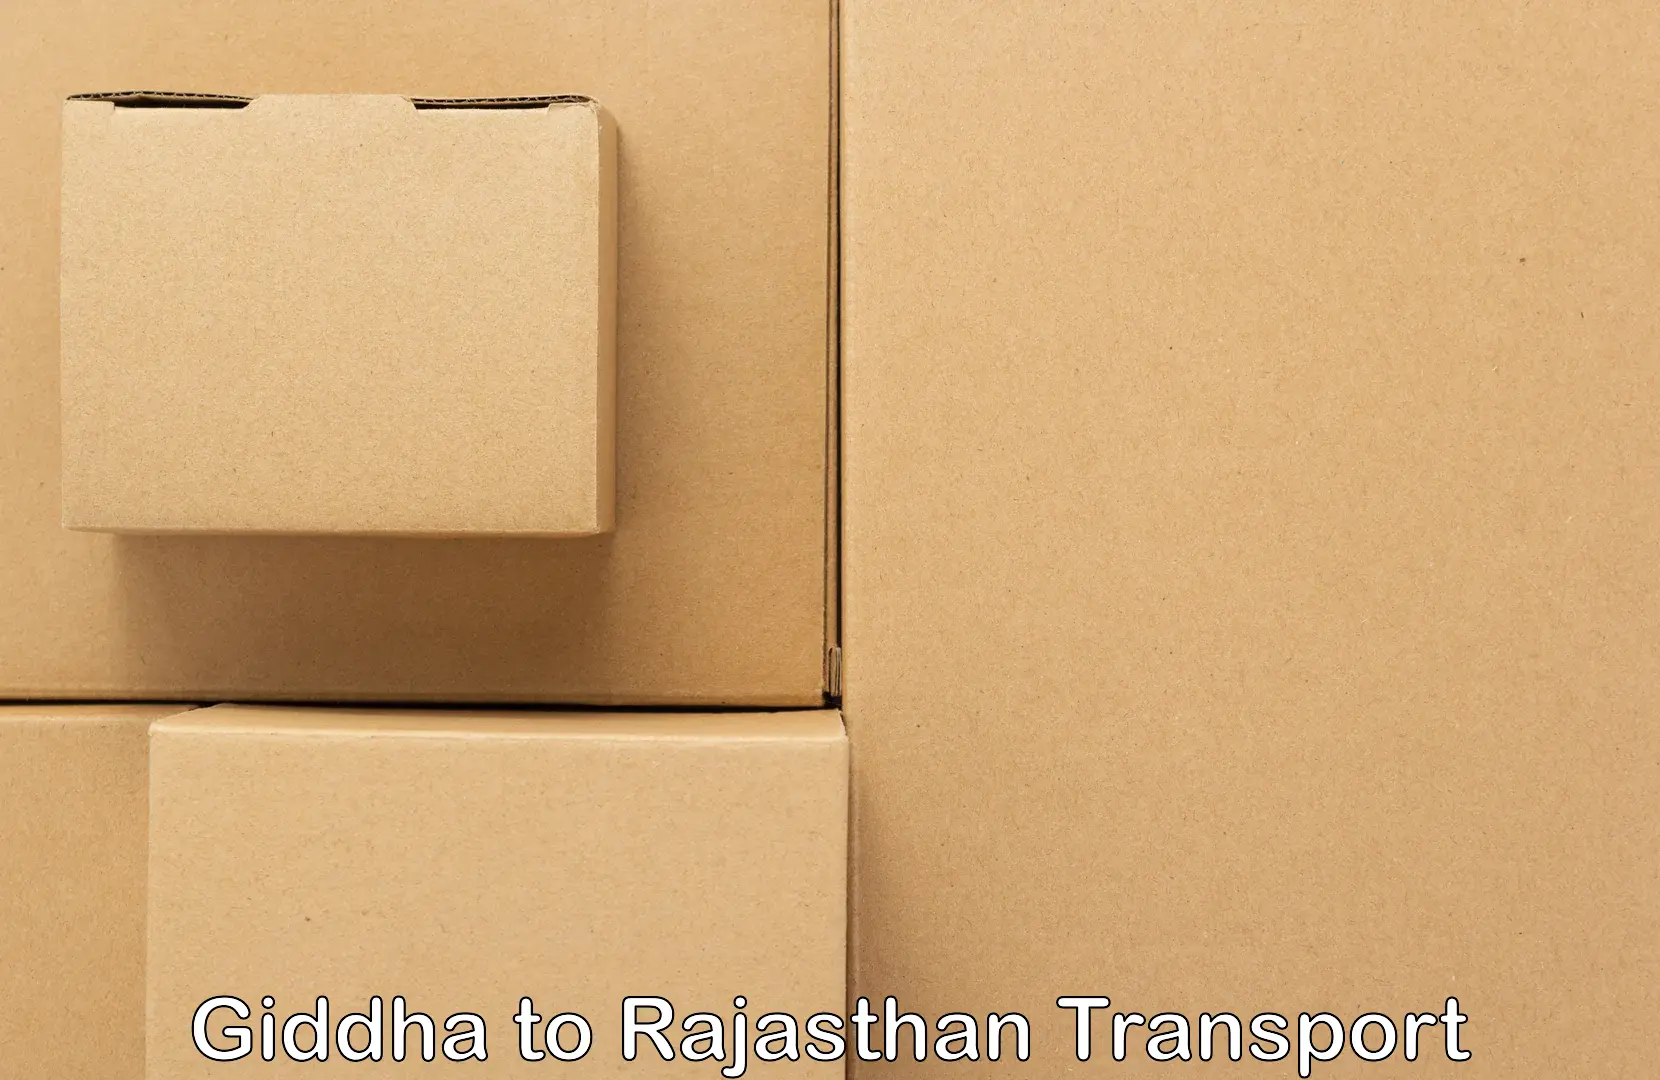 Air freight transport services Giddha to Udaipurwati